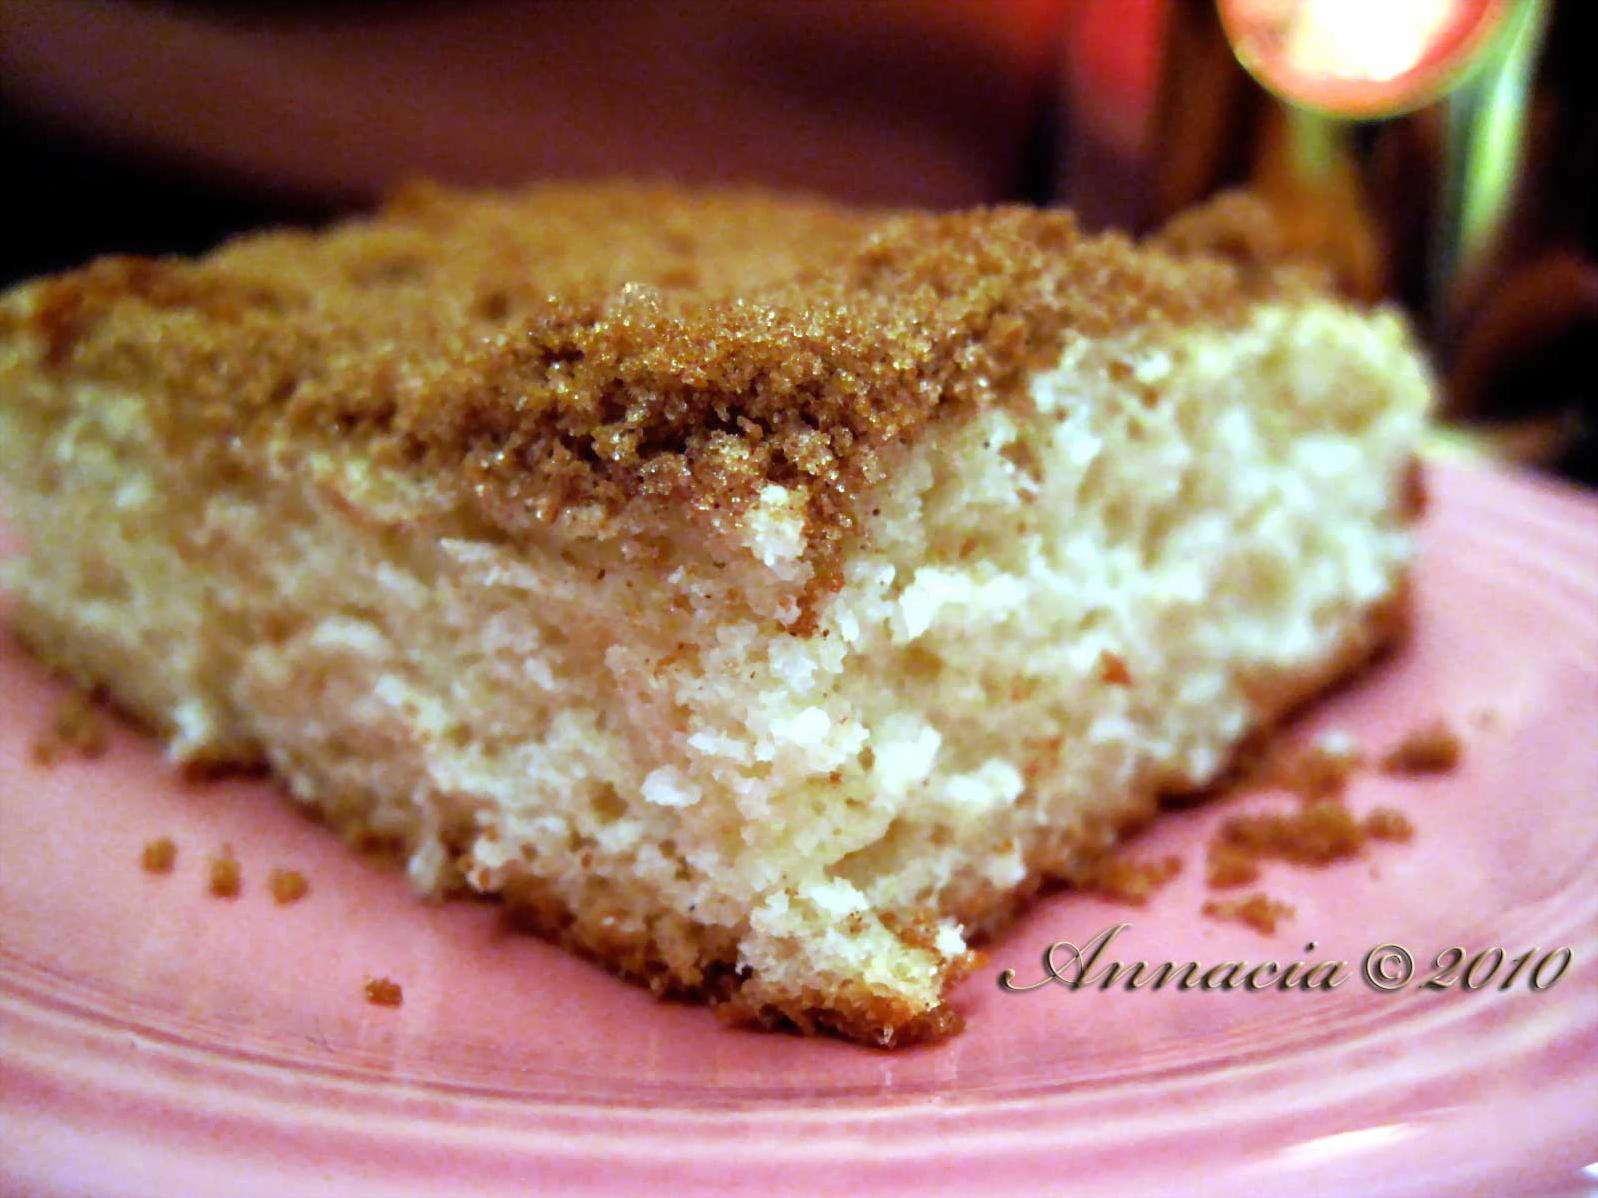  If you're looking for a cozy weekend breakfast, try this sour cream coffee cake.